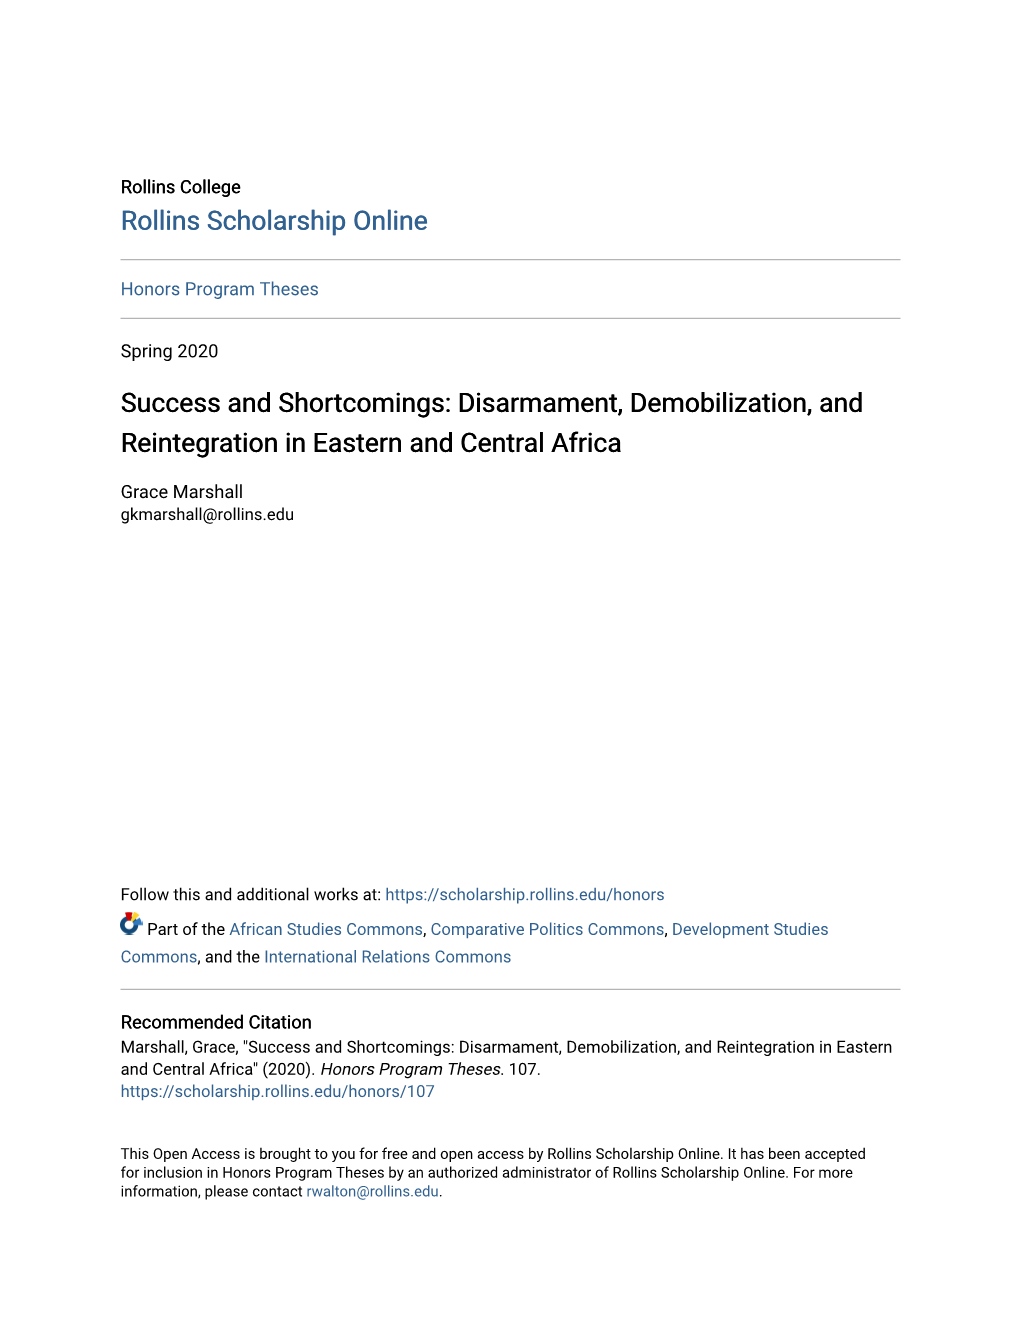 Disarmament, Demobilization, and Reintegration in Eastern and Central Africa